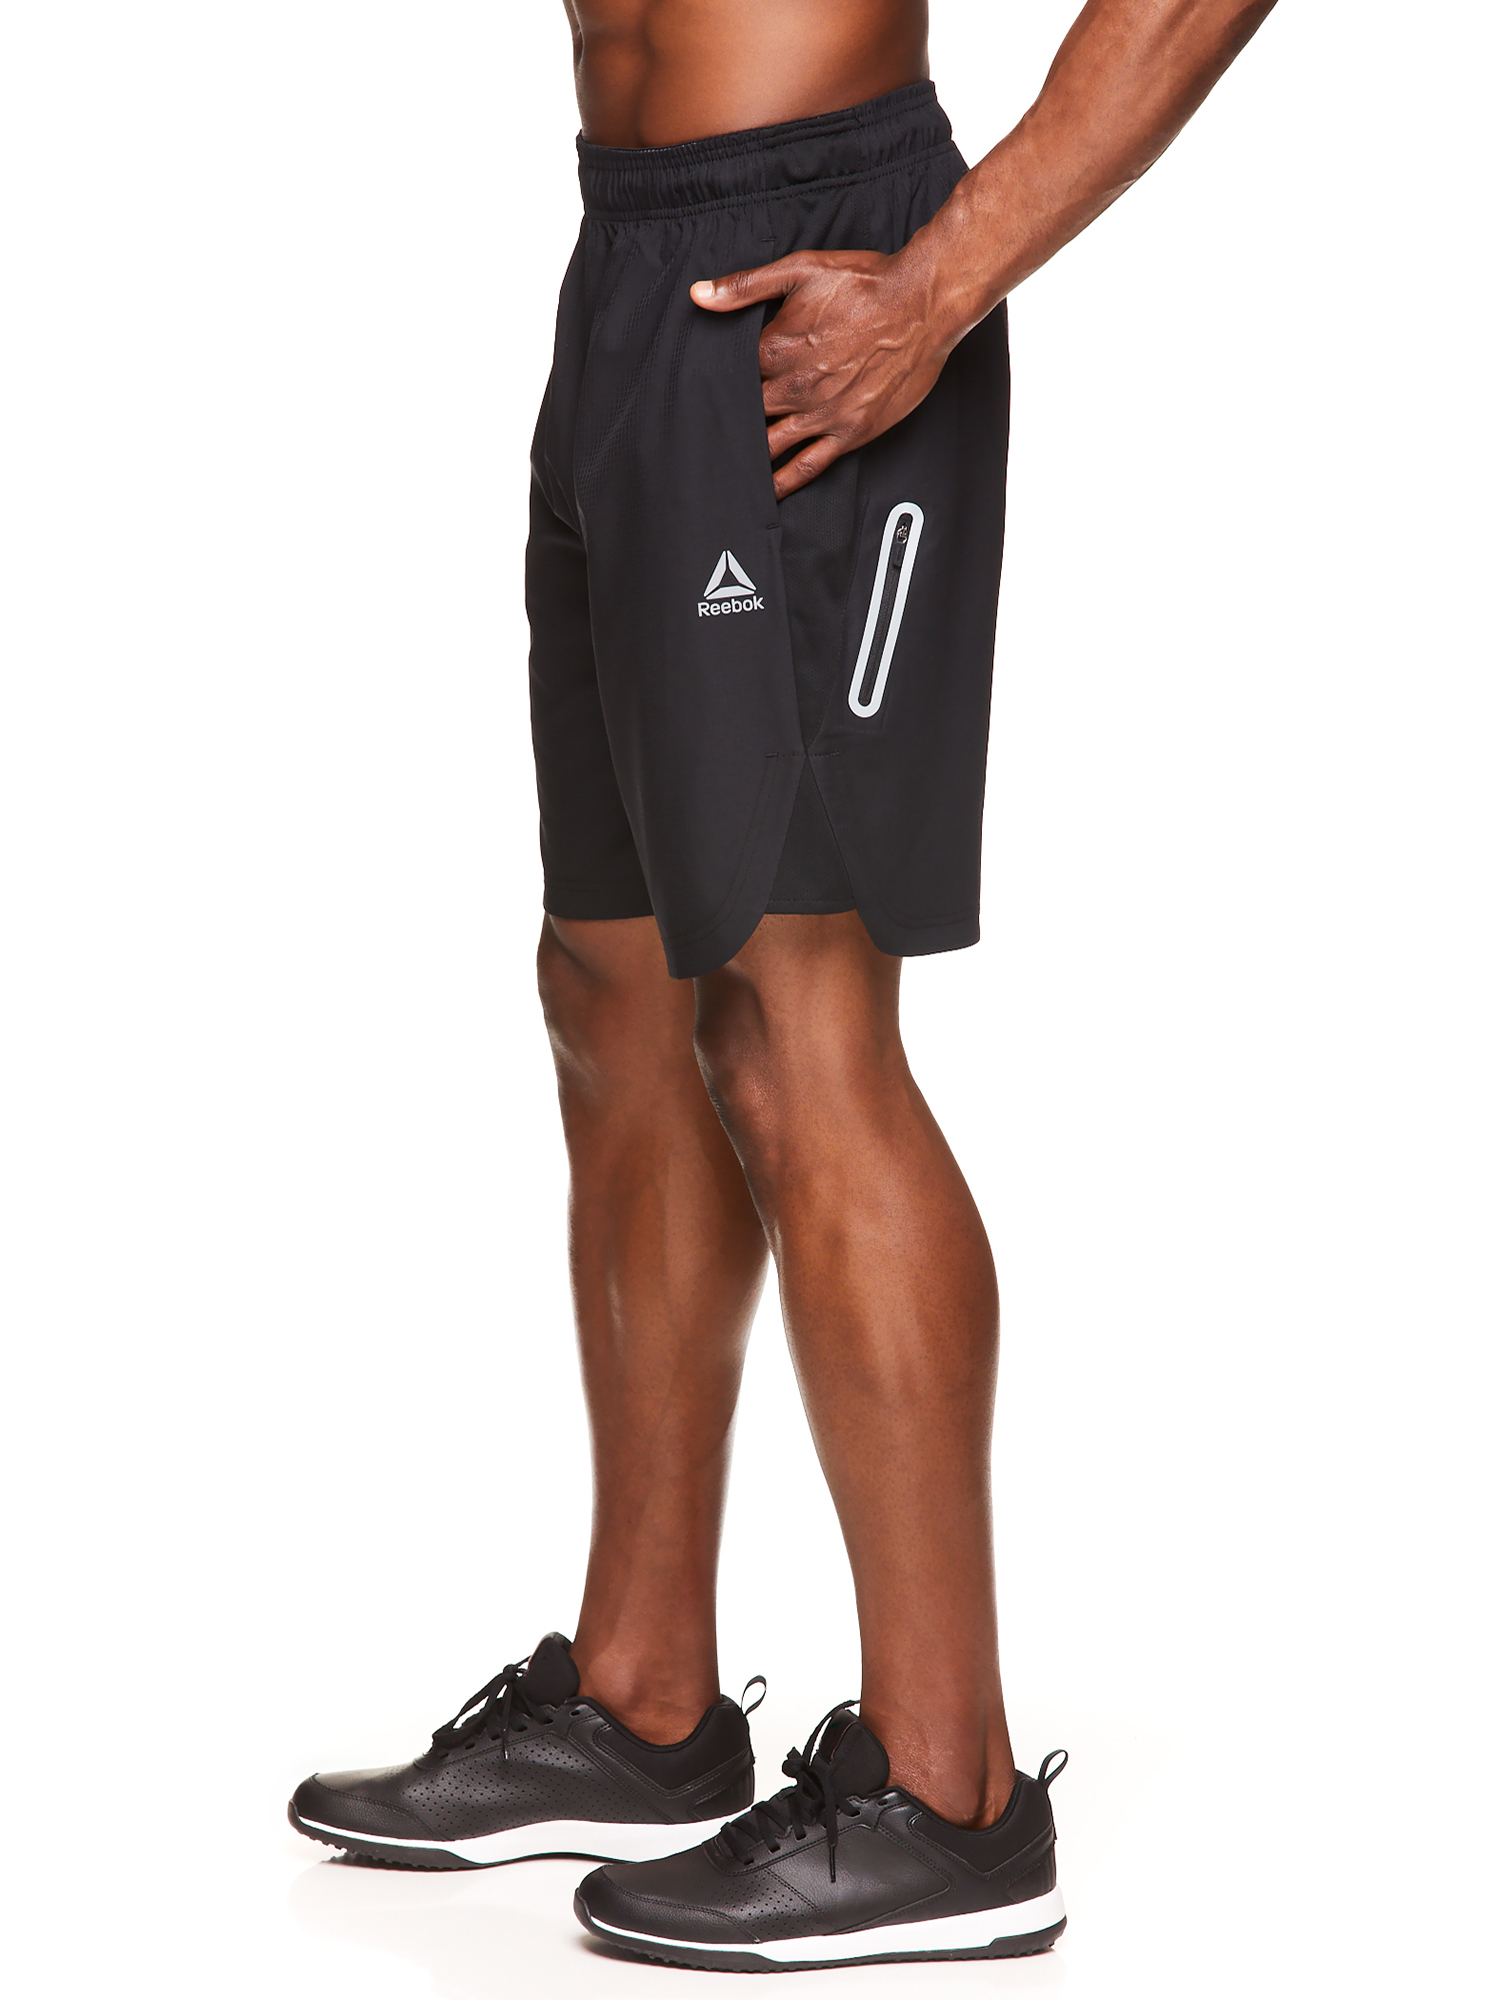 Reebok Men's and Big Men's Active Textured Woven Shorts, 9" Inseam, up to Size 3XL - image 4 of 4